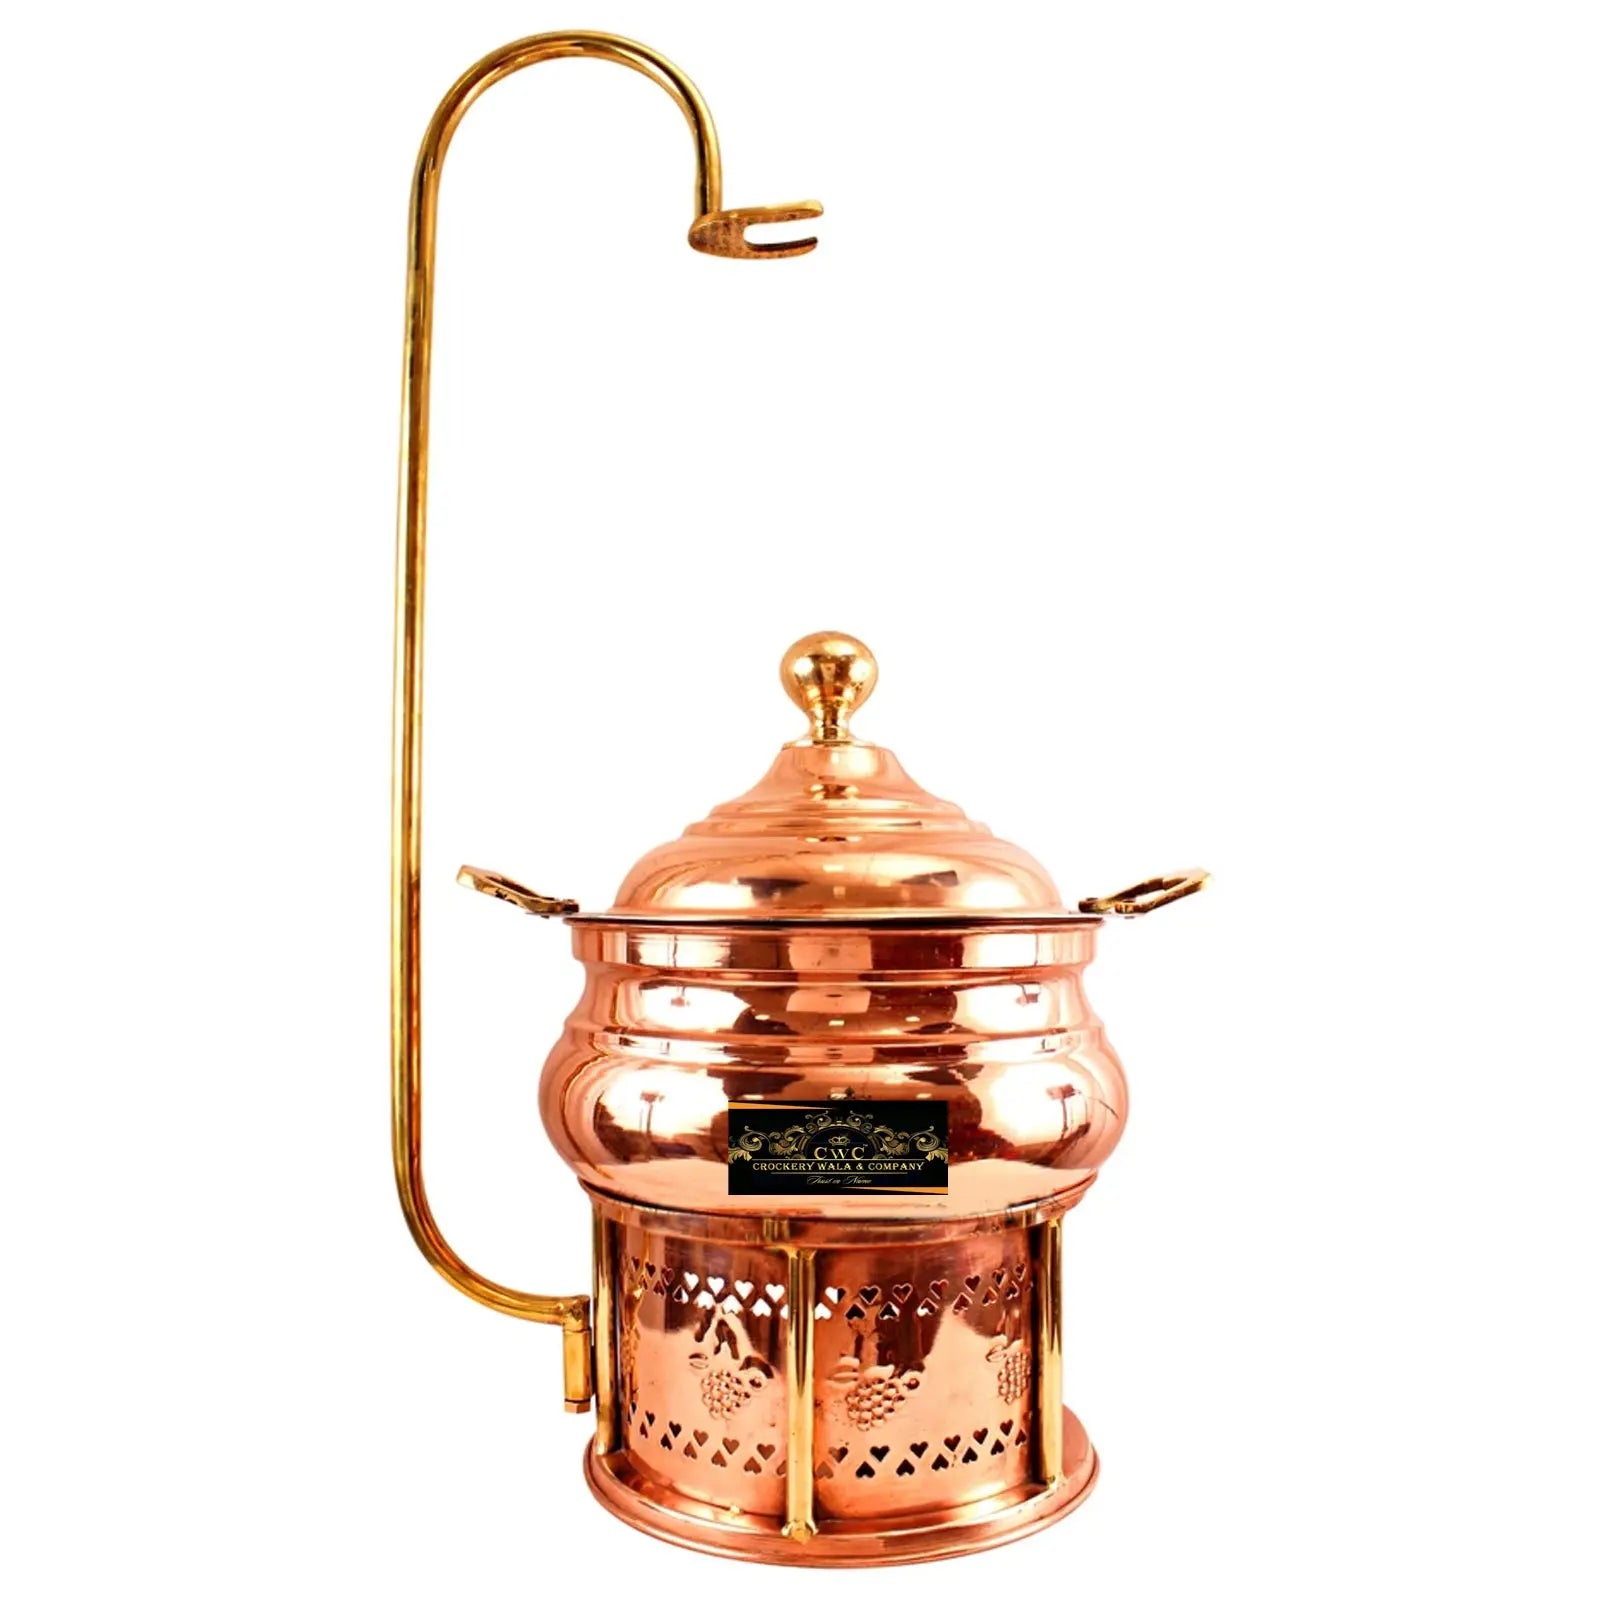 Crockery Wala And Company Copper Steel Chaffing Dish With Stand Plain Solid Design 4 Liters - CROCKERY WALA AND COMPANY 